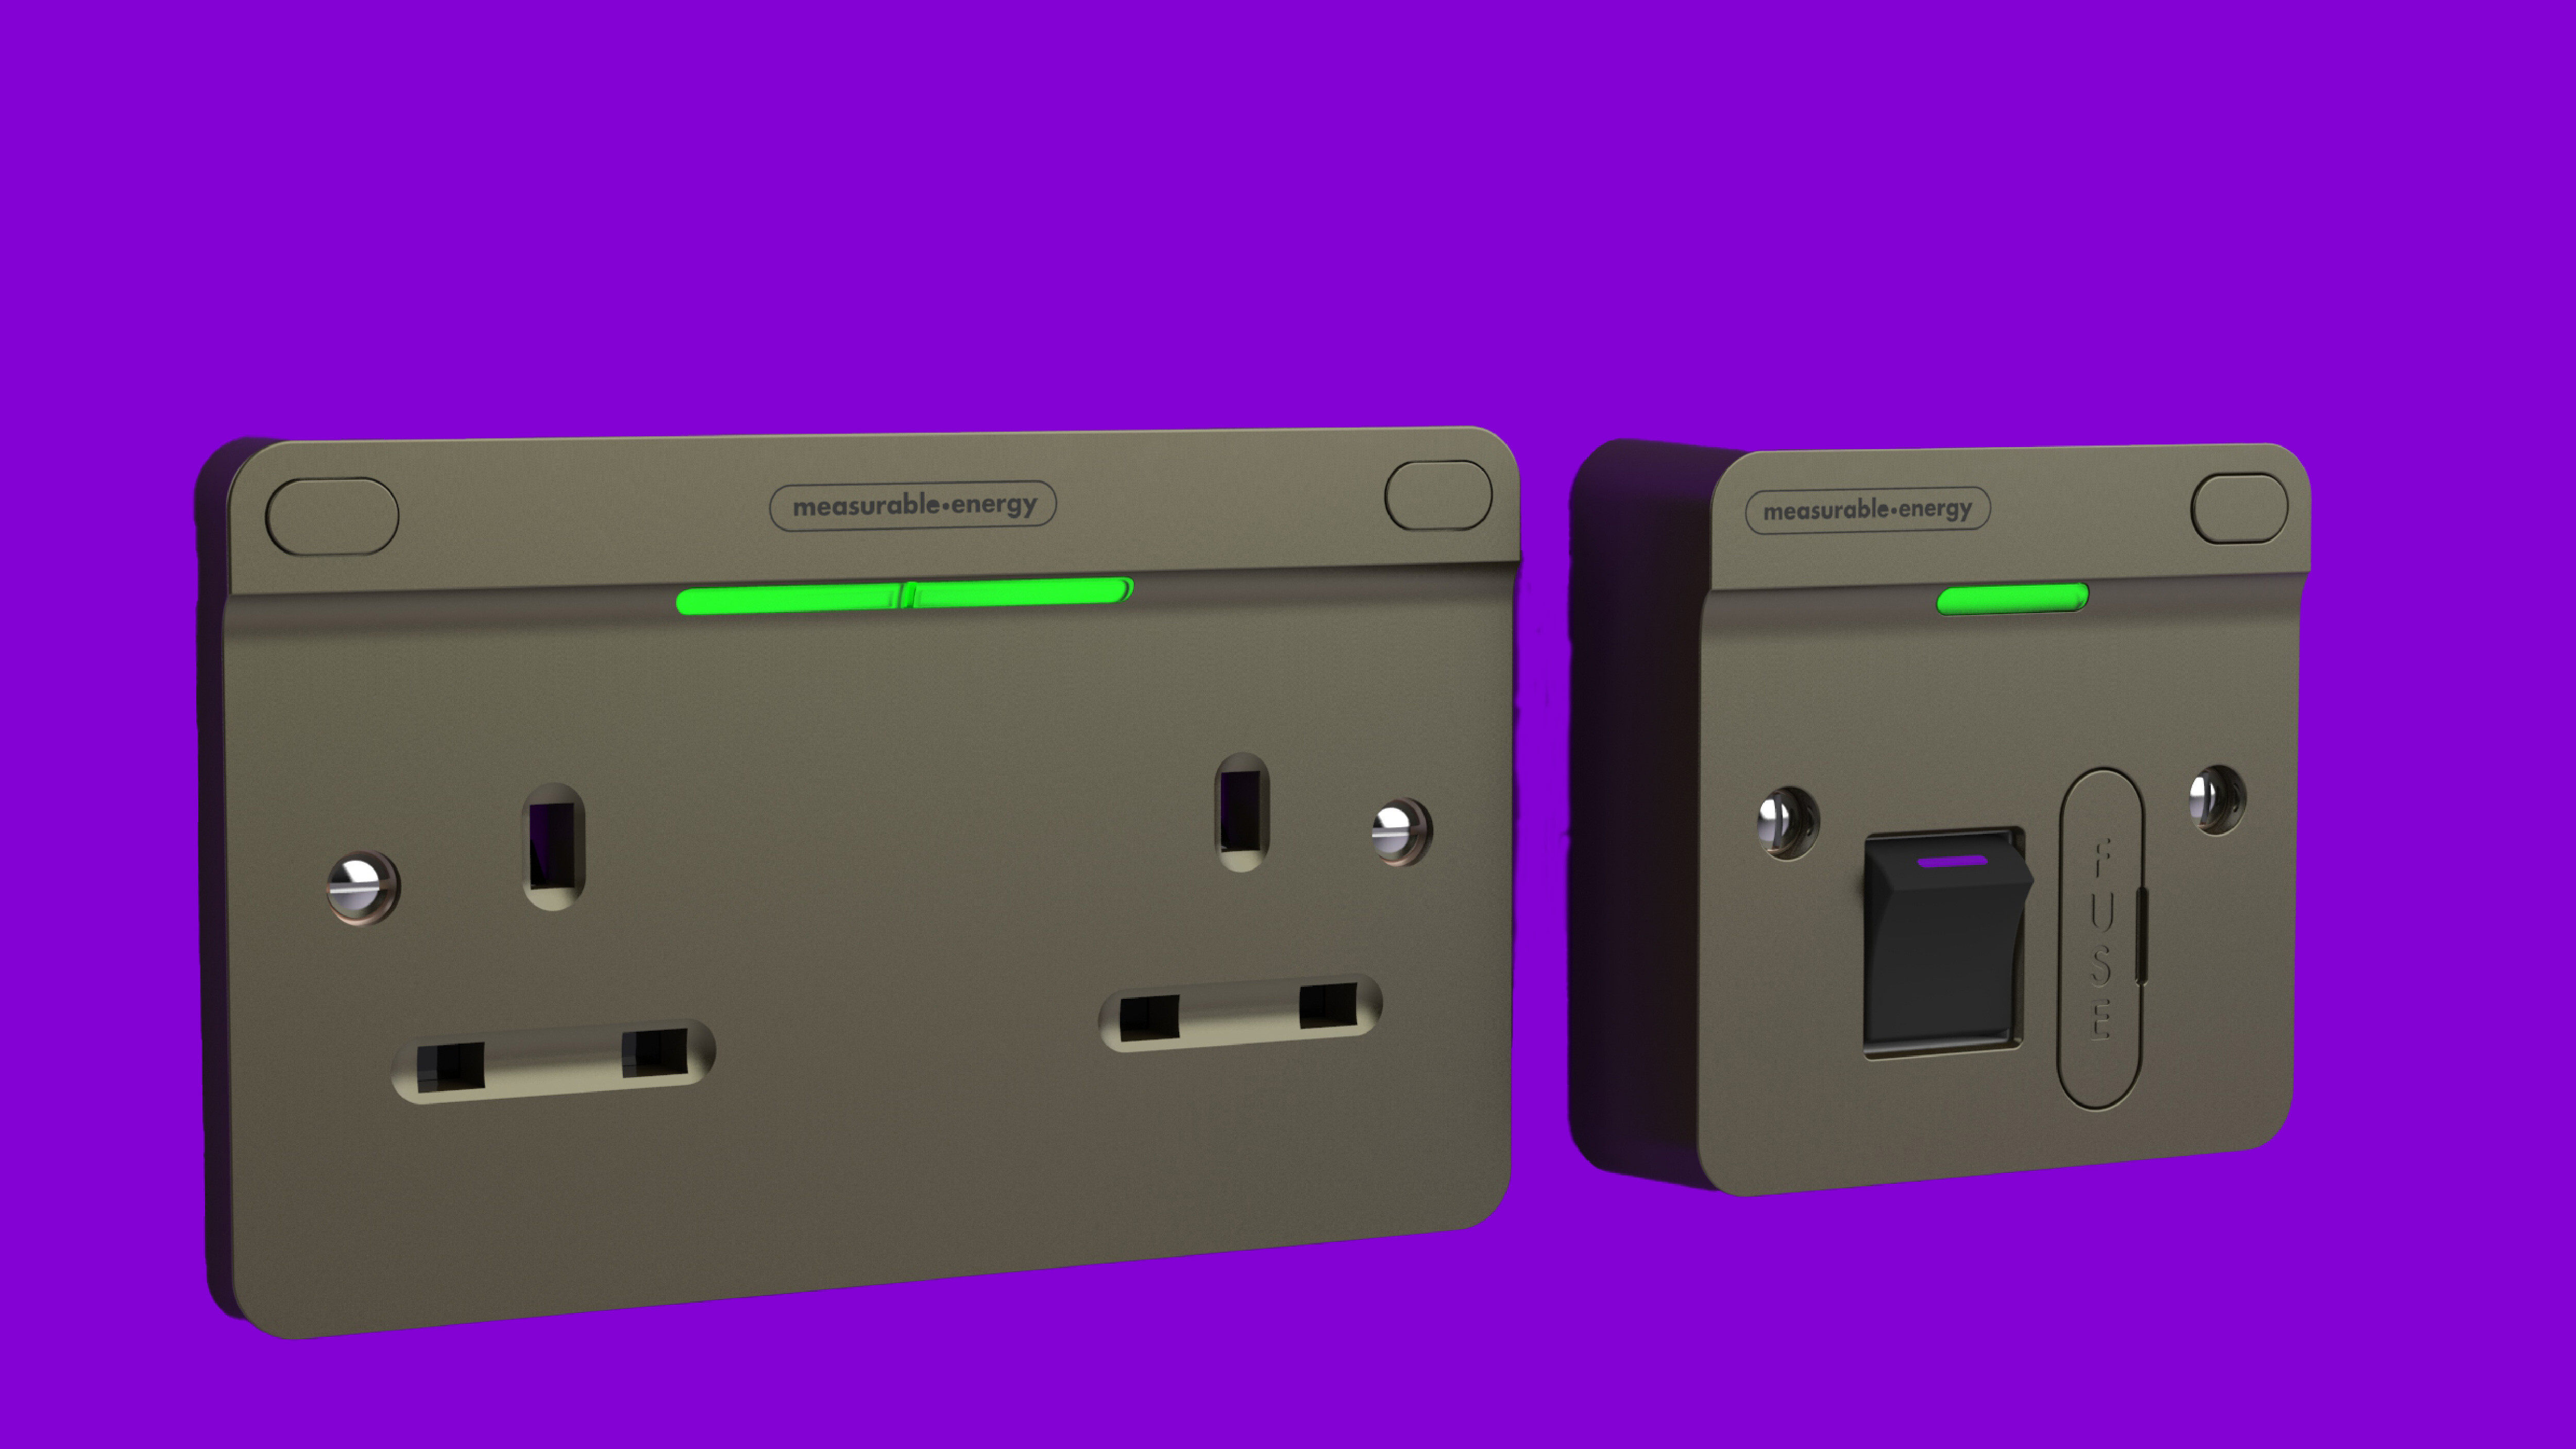 measurable.energy socket and fuse spur side by side on a purple background.